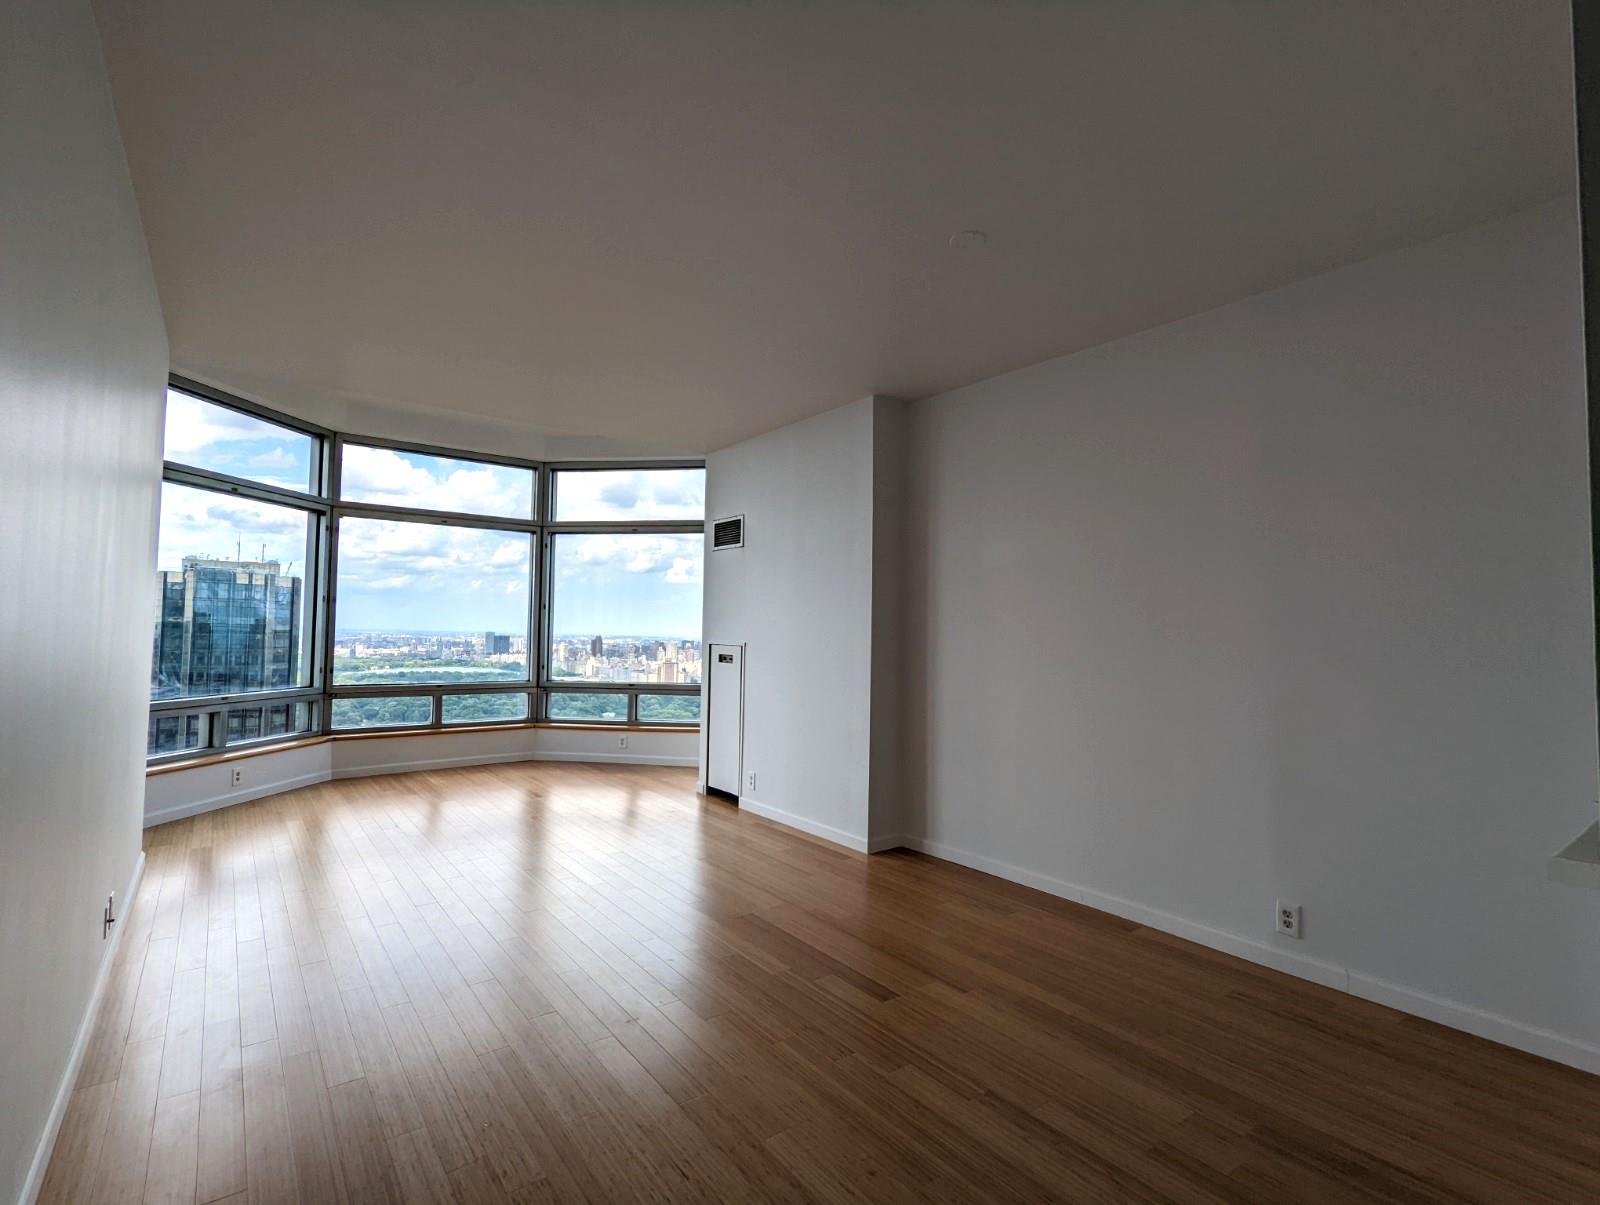 a view of a room with wooden floor and floor to ceiling window